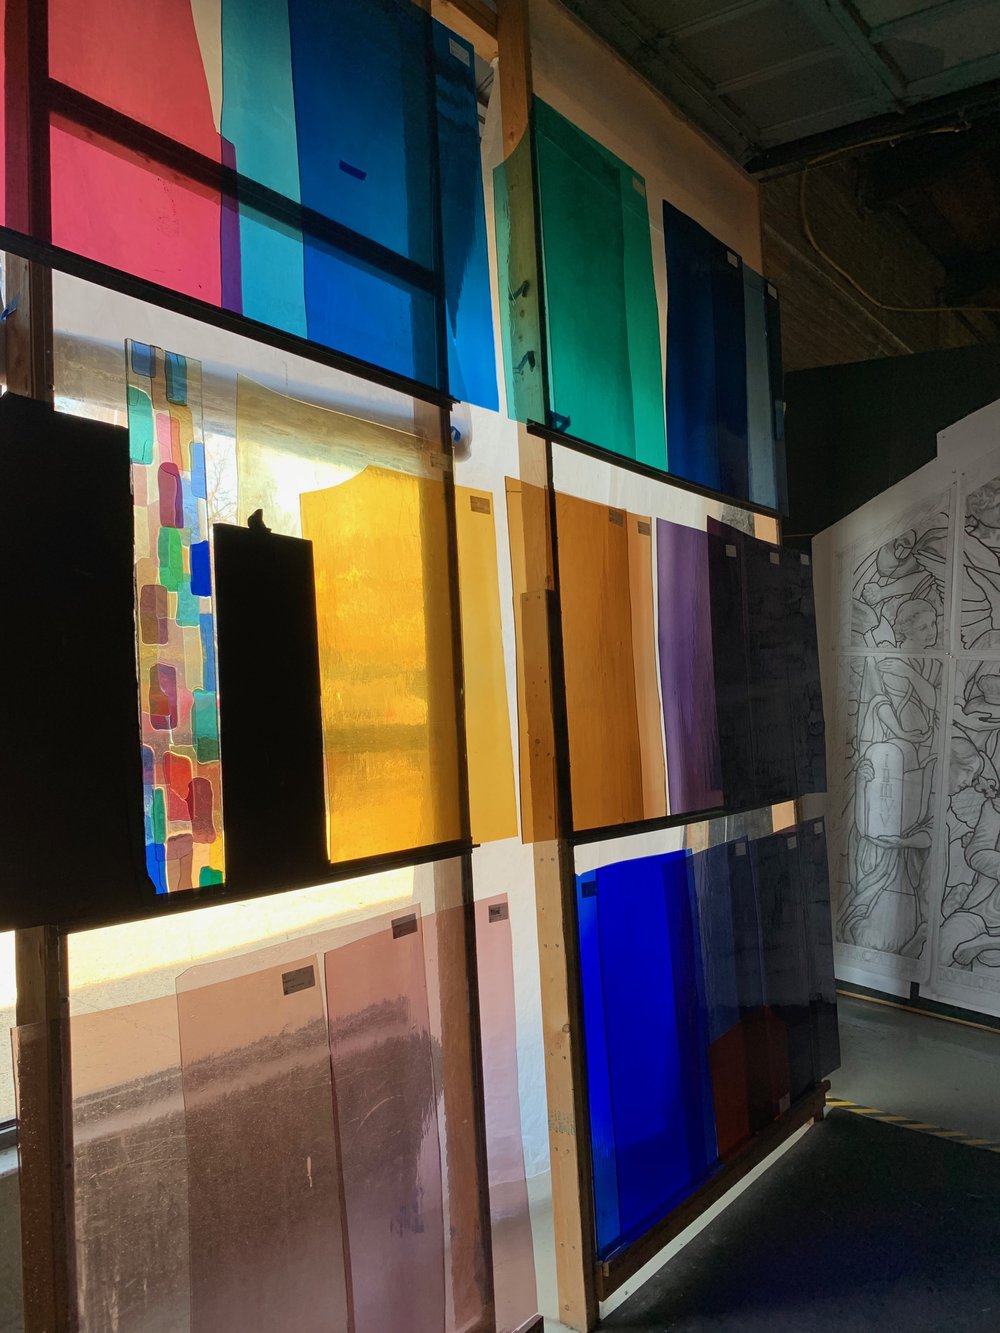  The stained glass windows in progress at Beyer Studio. 